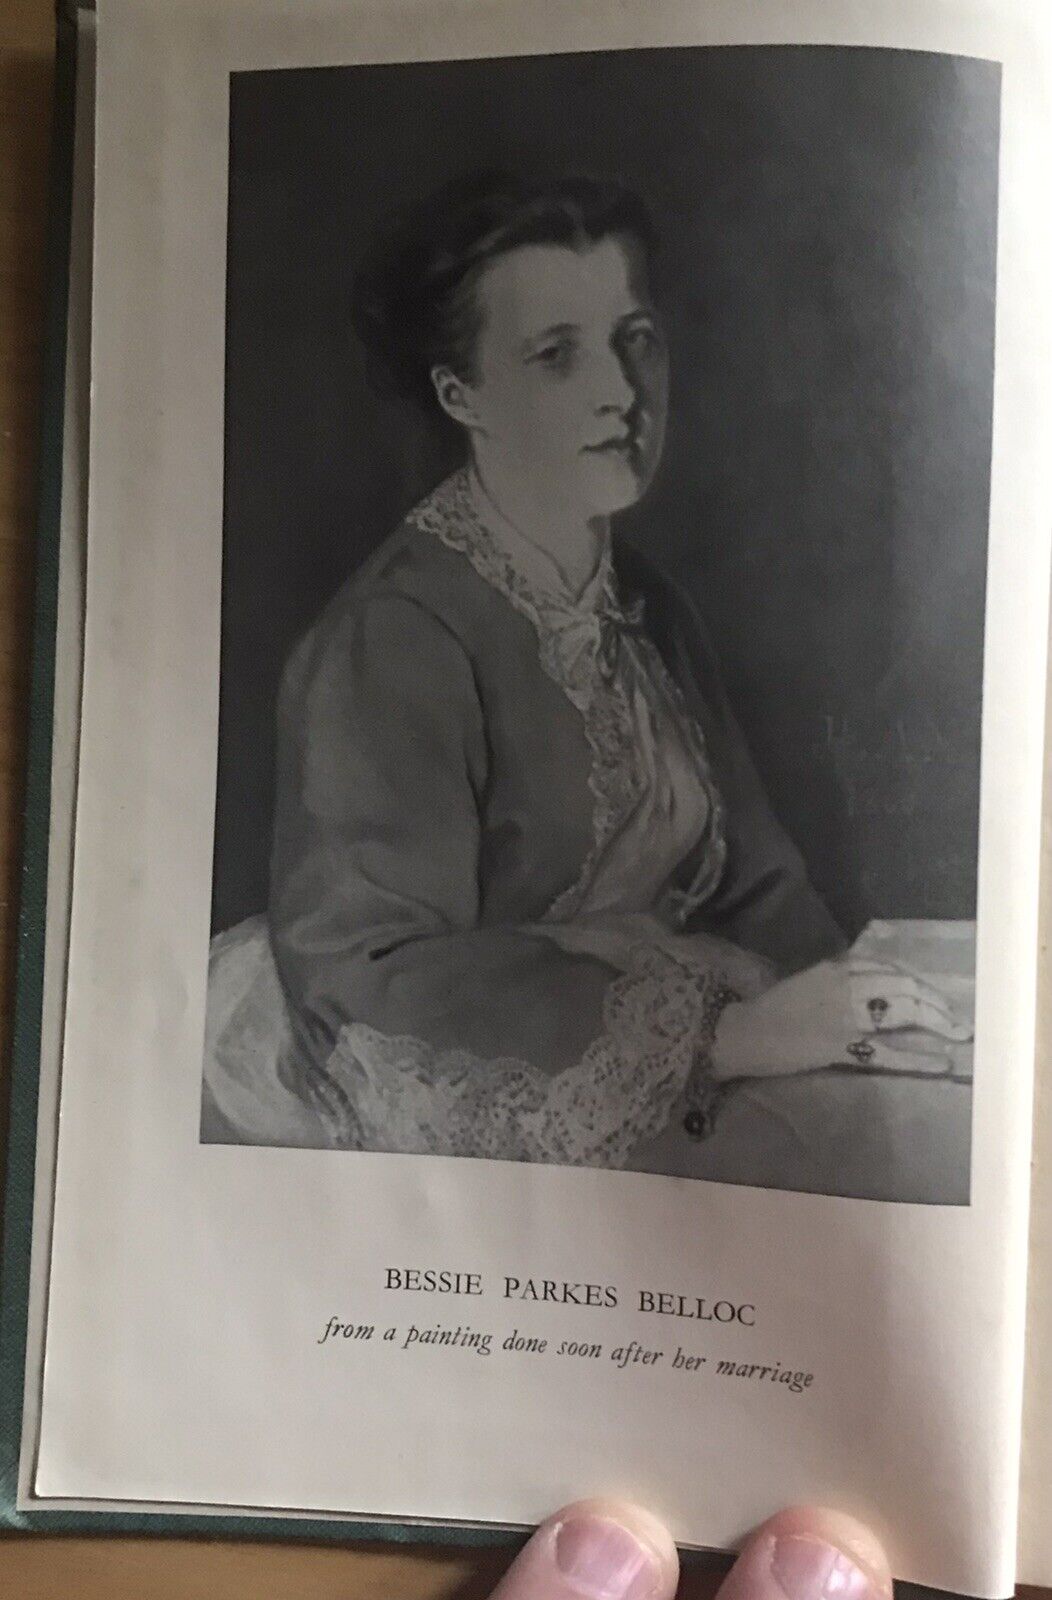 1943 I, Too, Have Lived In Arcadia - Mrs Belloc Lowndes(Readers Union) Honeyburn Books (UK)